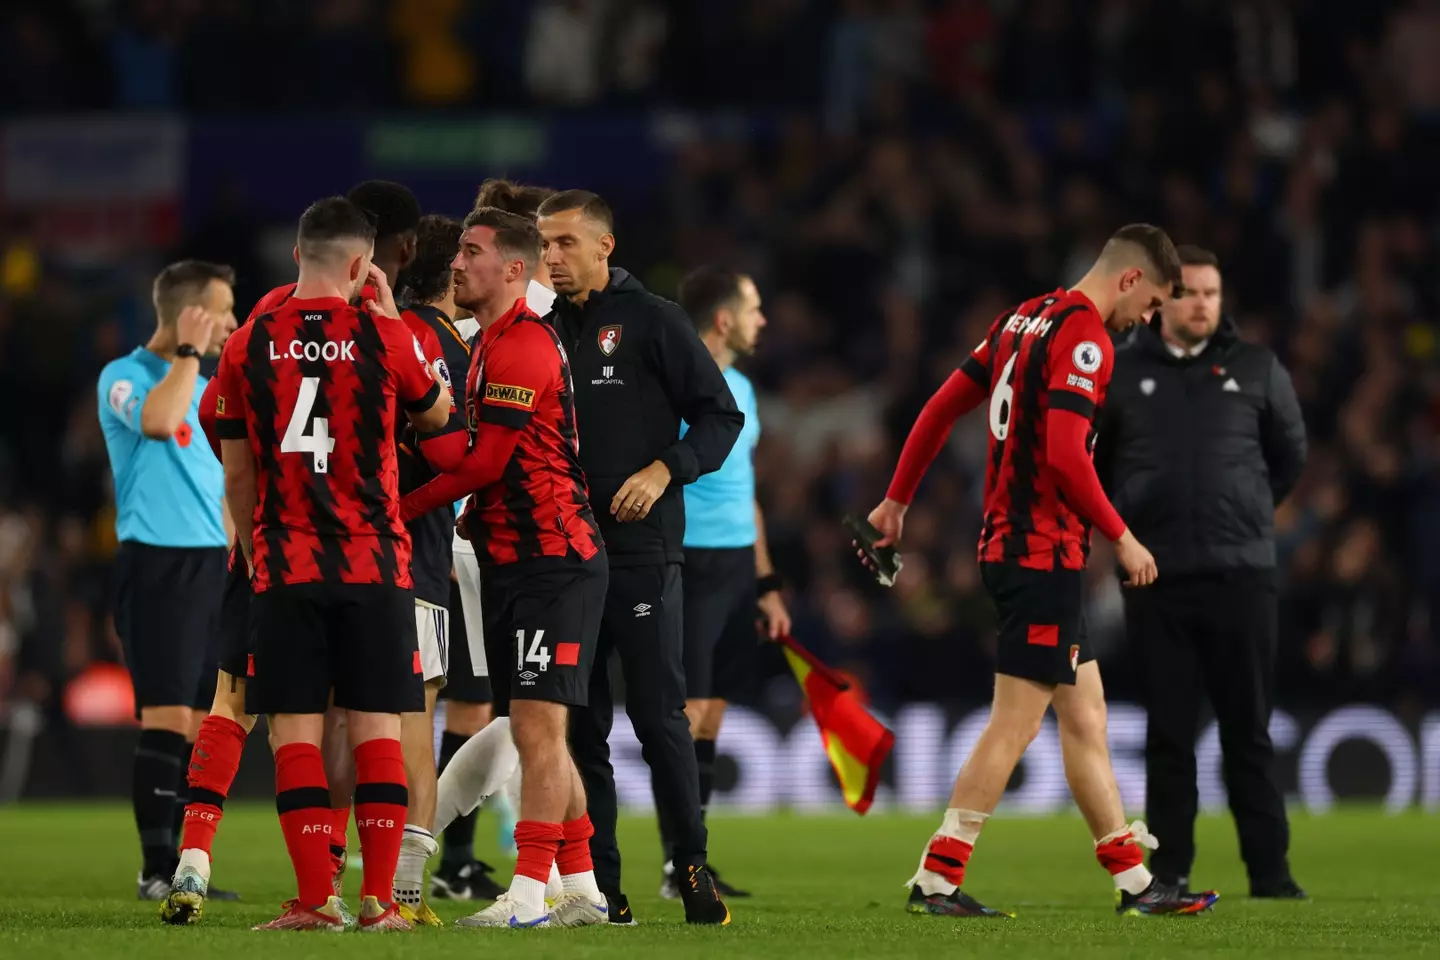 Bournemouth players following last weekend's 4-3 defeat to Leeds. (Image